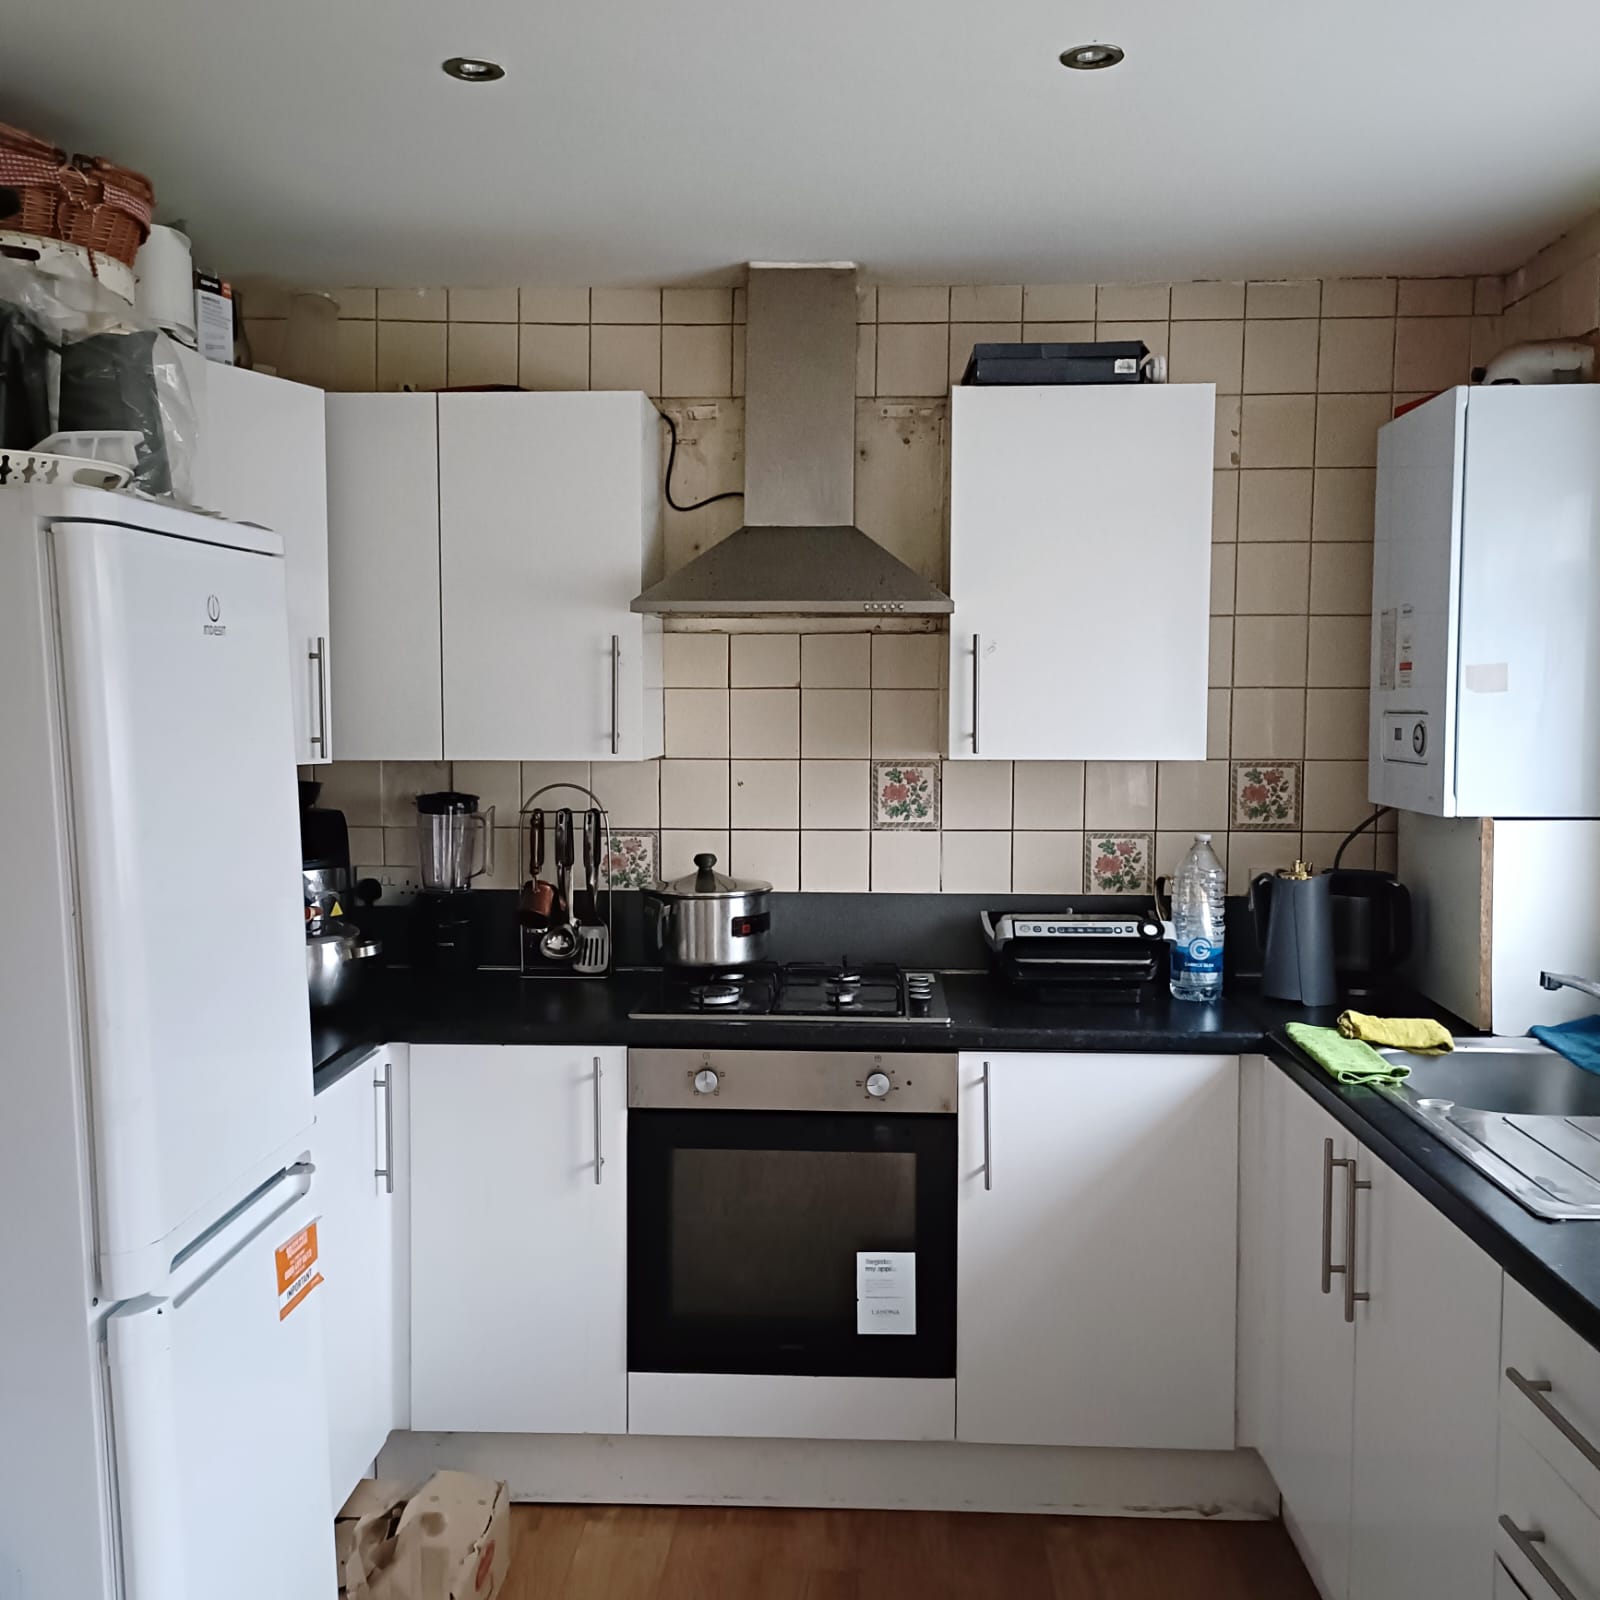 4 bed Terraced for rent in Wembley. From PropertyLoop